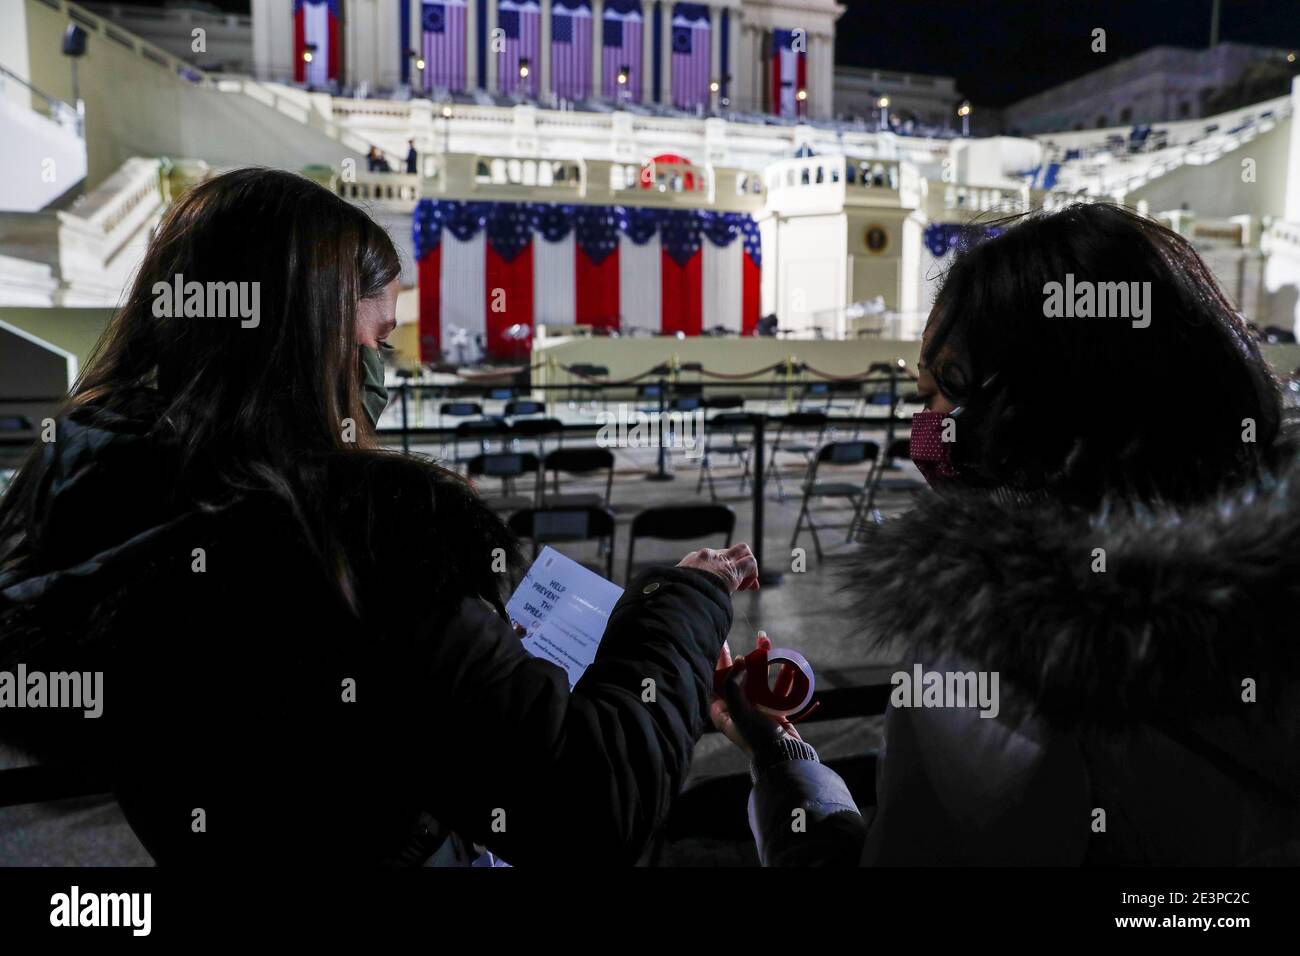 Staff members put out COVID-19 information signs in the seating area before Joe Biden's presidential inauguration in Washington, U.S., January 20, 2021. REUTERS/Jim Bourg Stock Photo